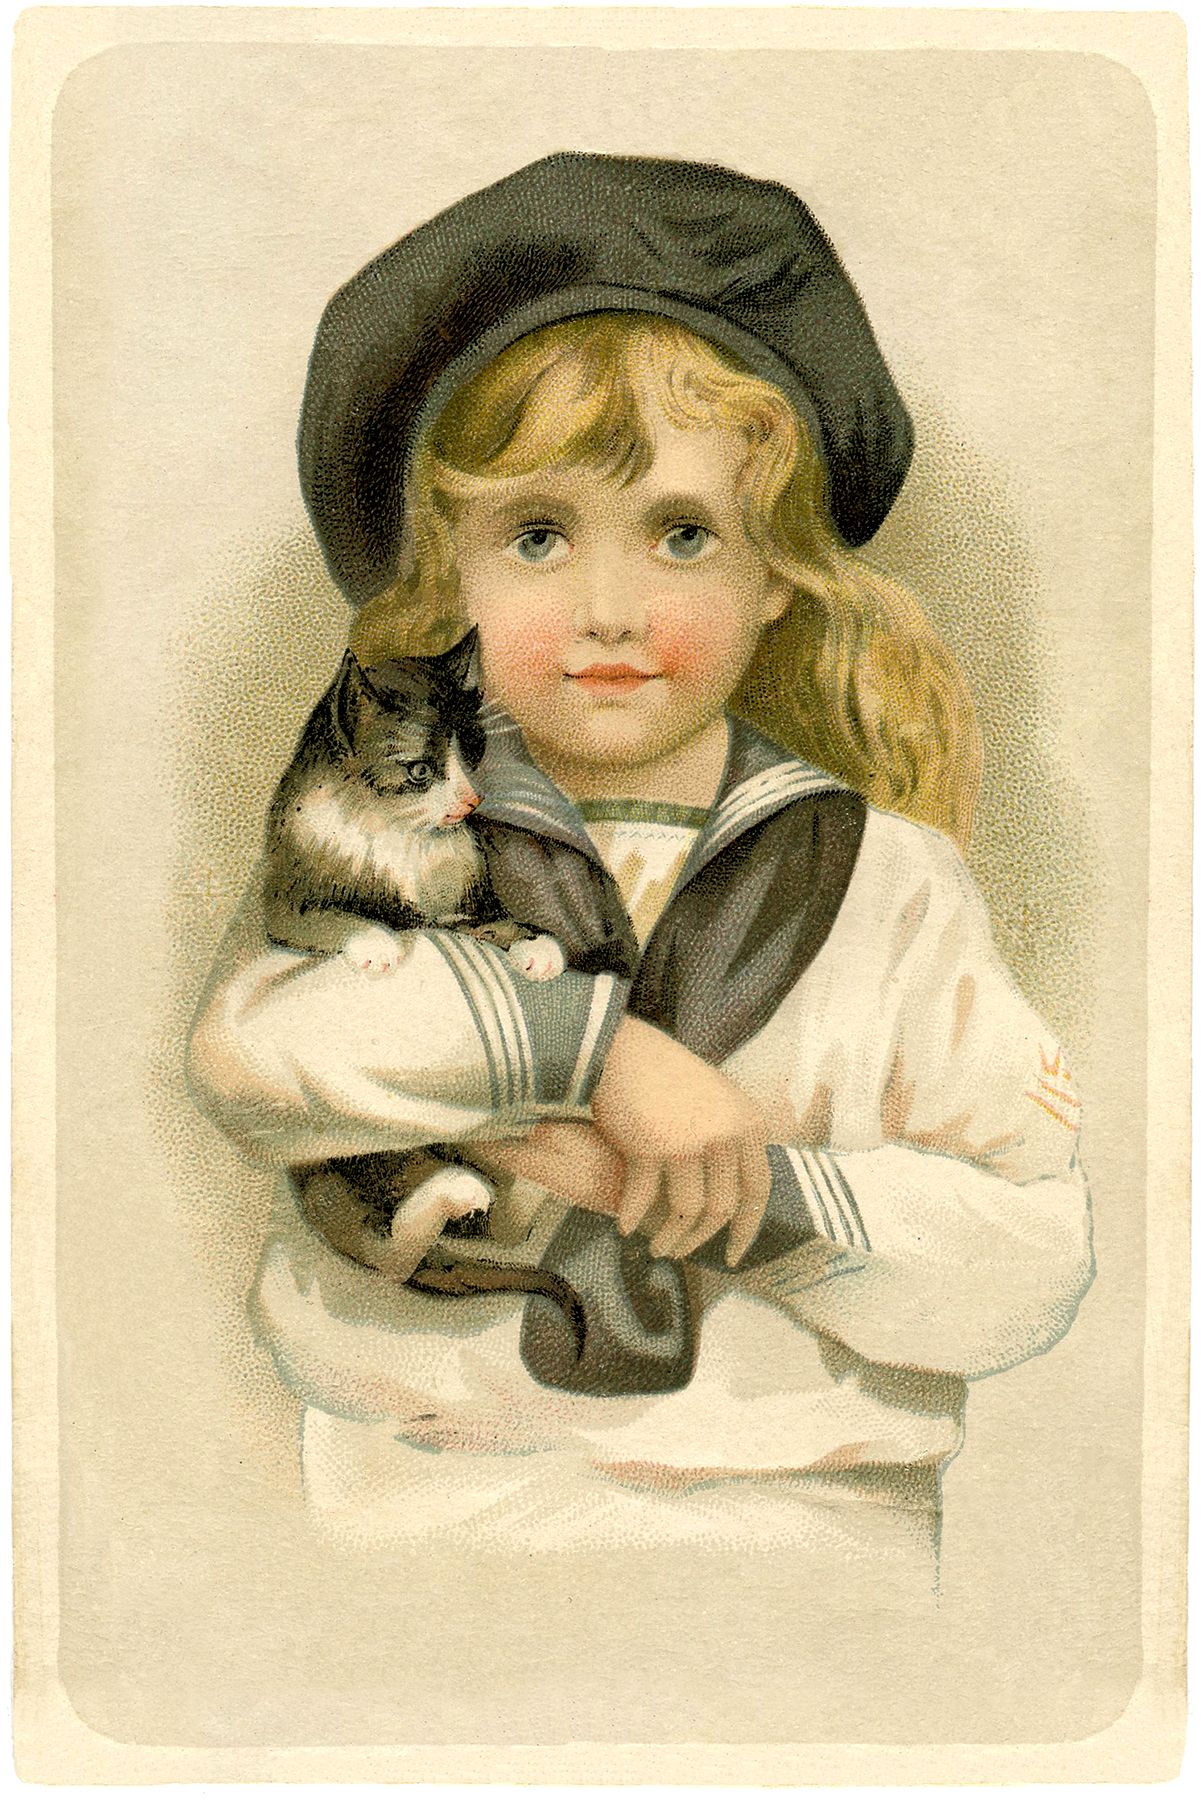 Vintage Child With Cat Image – Sweet! – The Graphics Fairy For Most Popular Children Framed Art Prints (View 20 of 20)